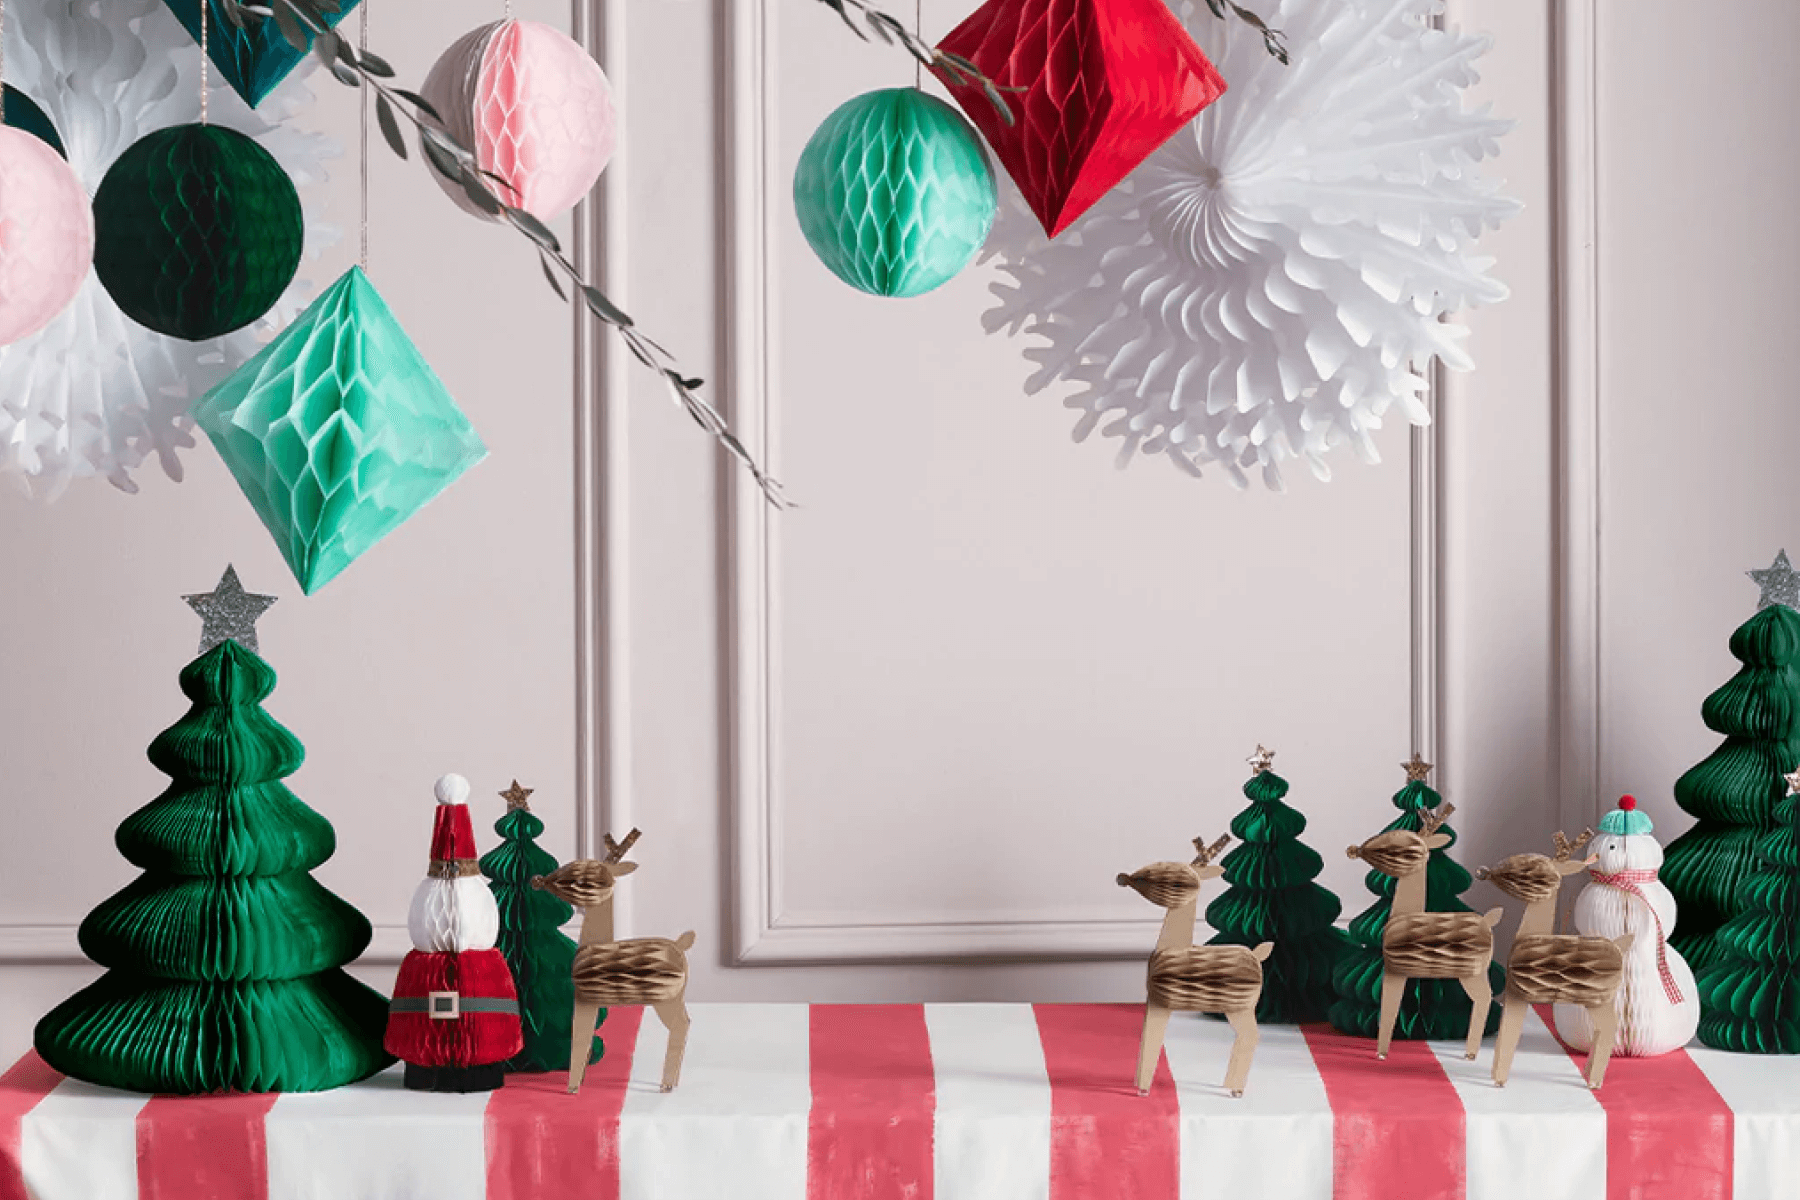 Paper Christmas decorations laid out on a red and white striped table with hanging paper decorations above.